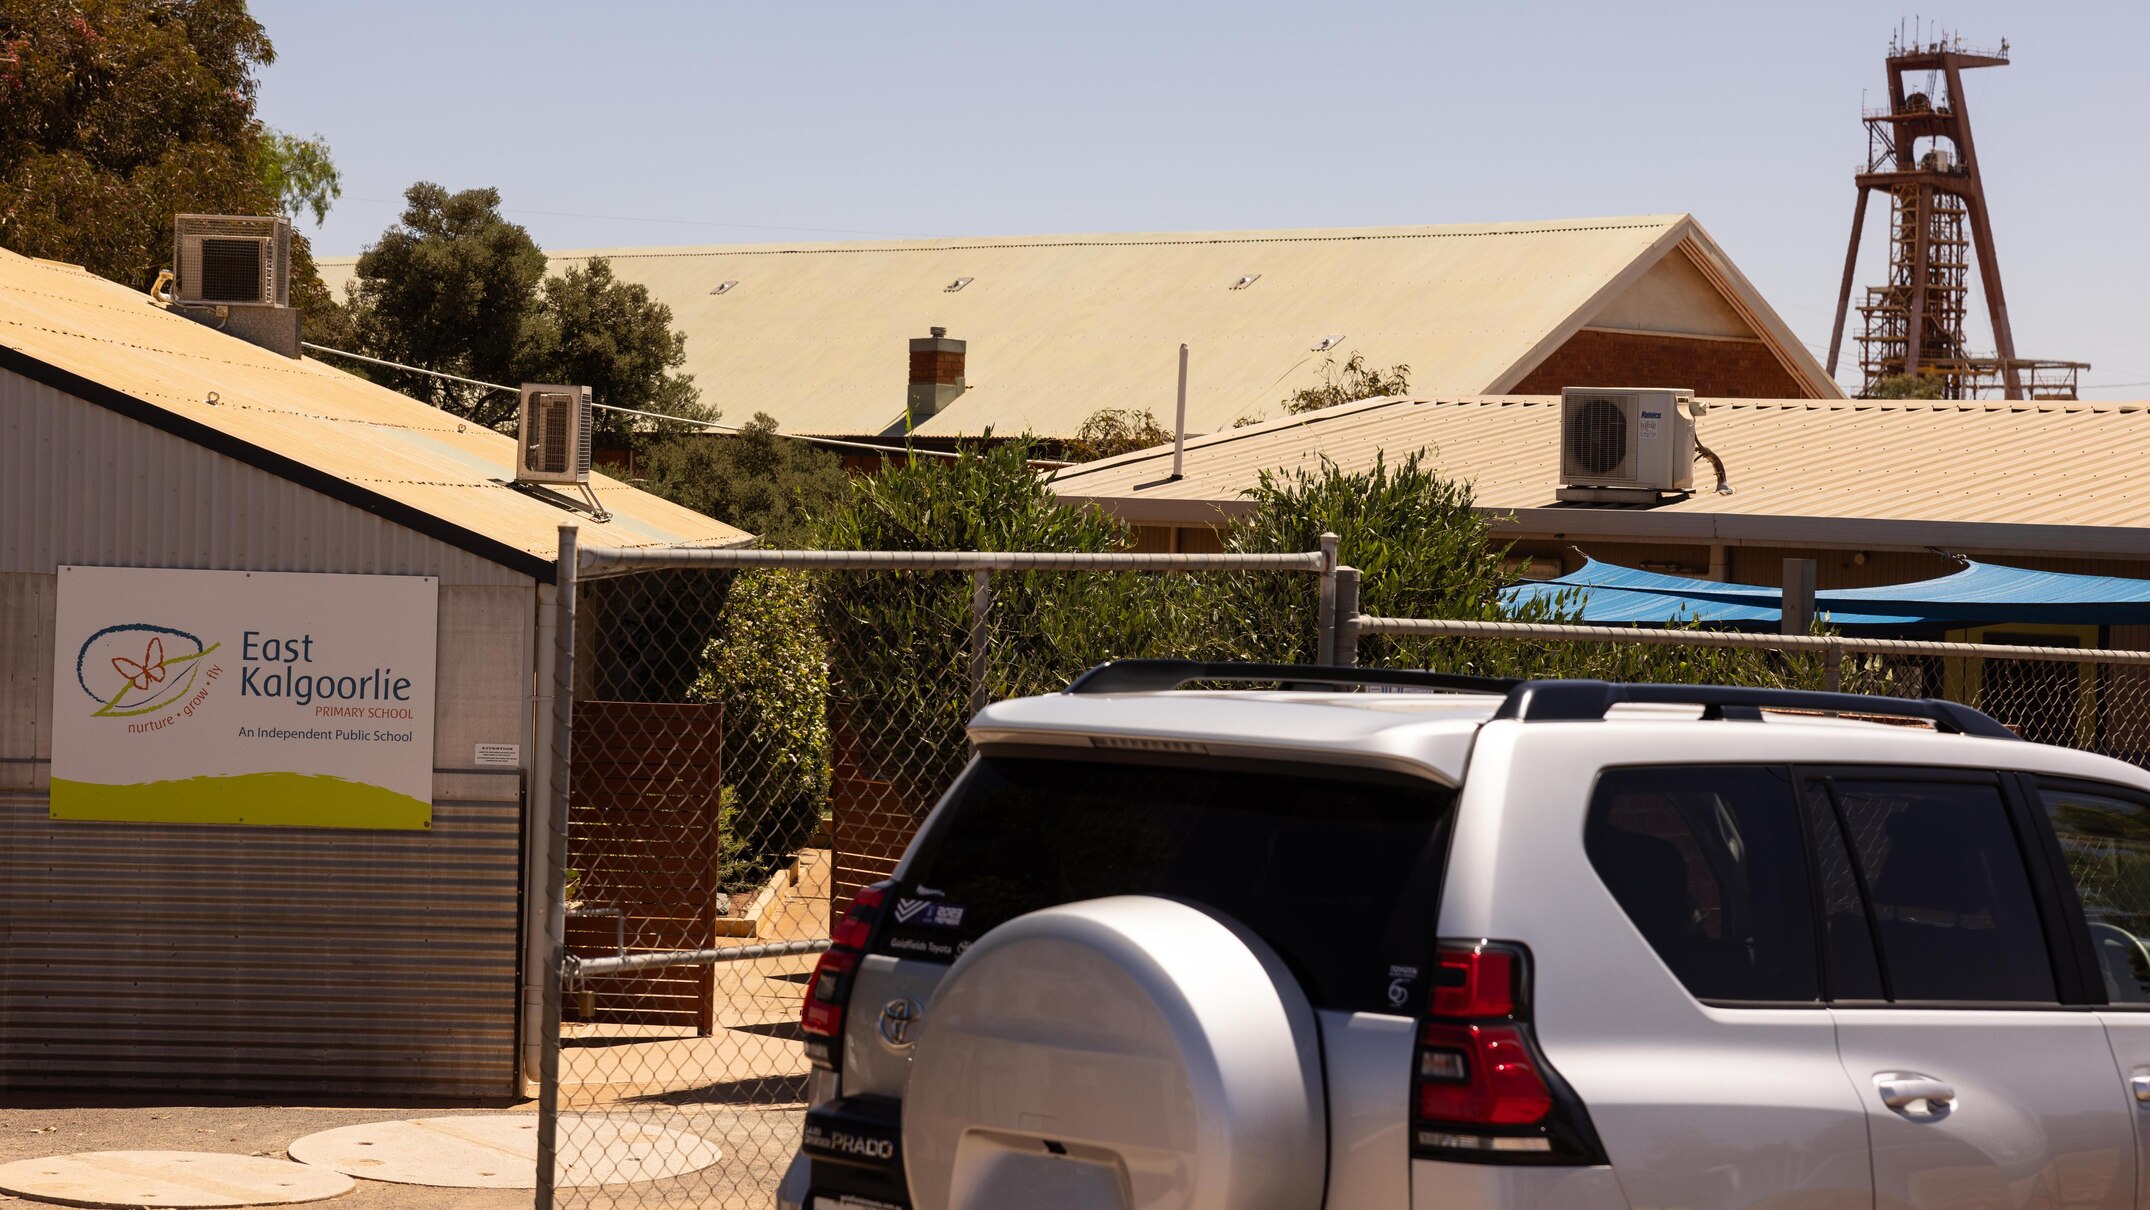 east kalgoorlie primary school closed for the rest of term after mercury scare